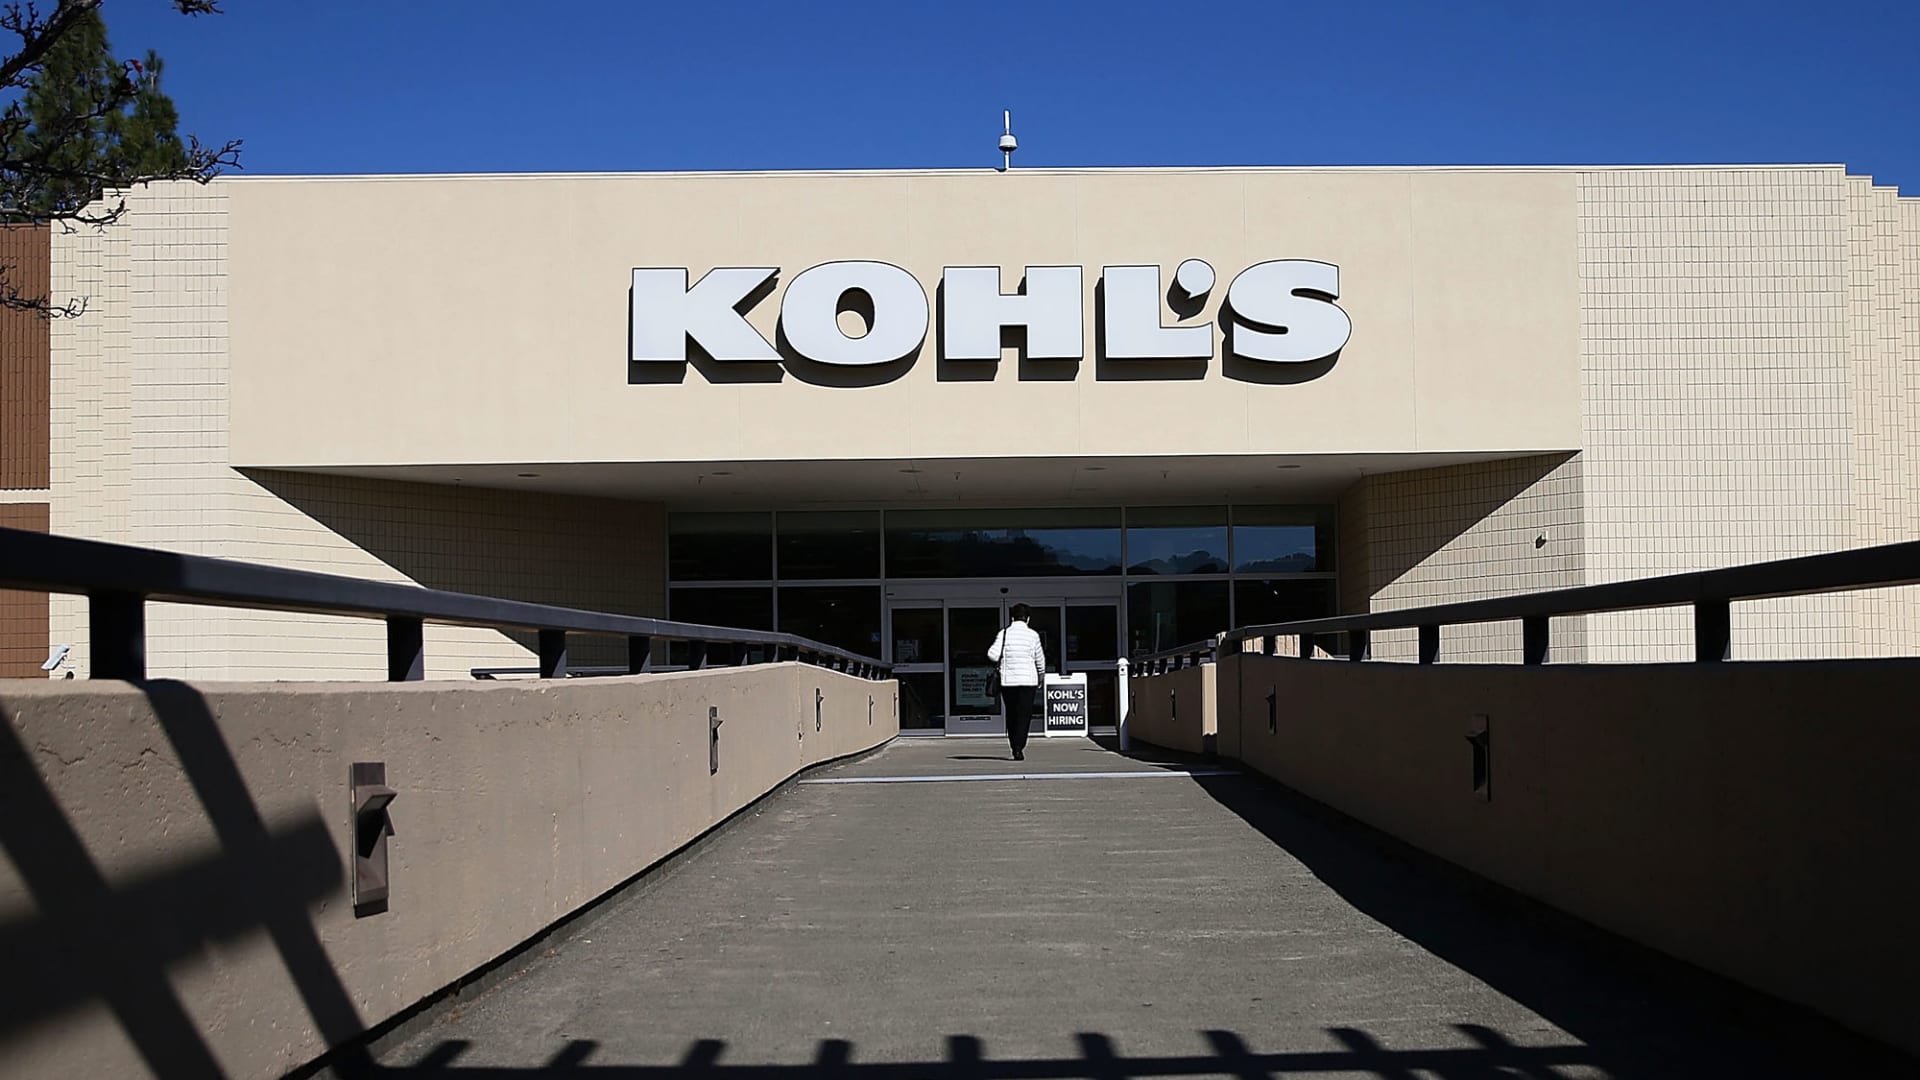 Kohl’s terminates sale talks with Vitamin Shoppe owner Franchise Group, sources say